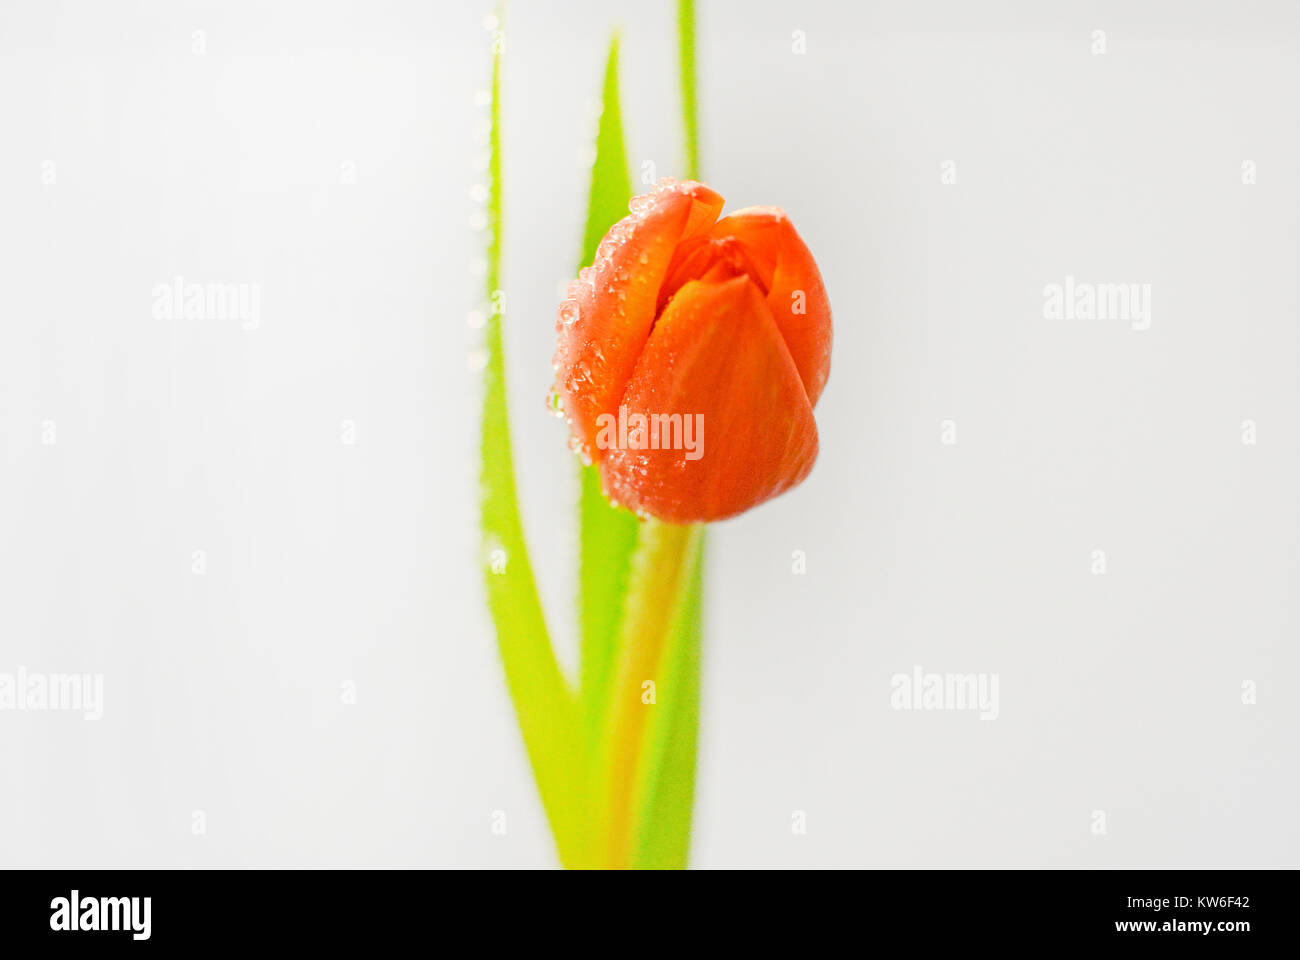 Simple, artistic photograph of an orange tulip posed gracefully against a modern background. Stock Photo